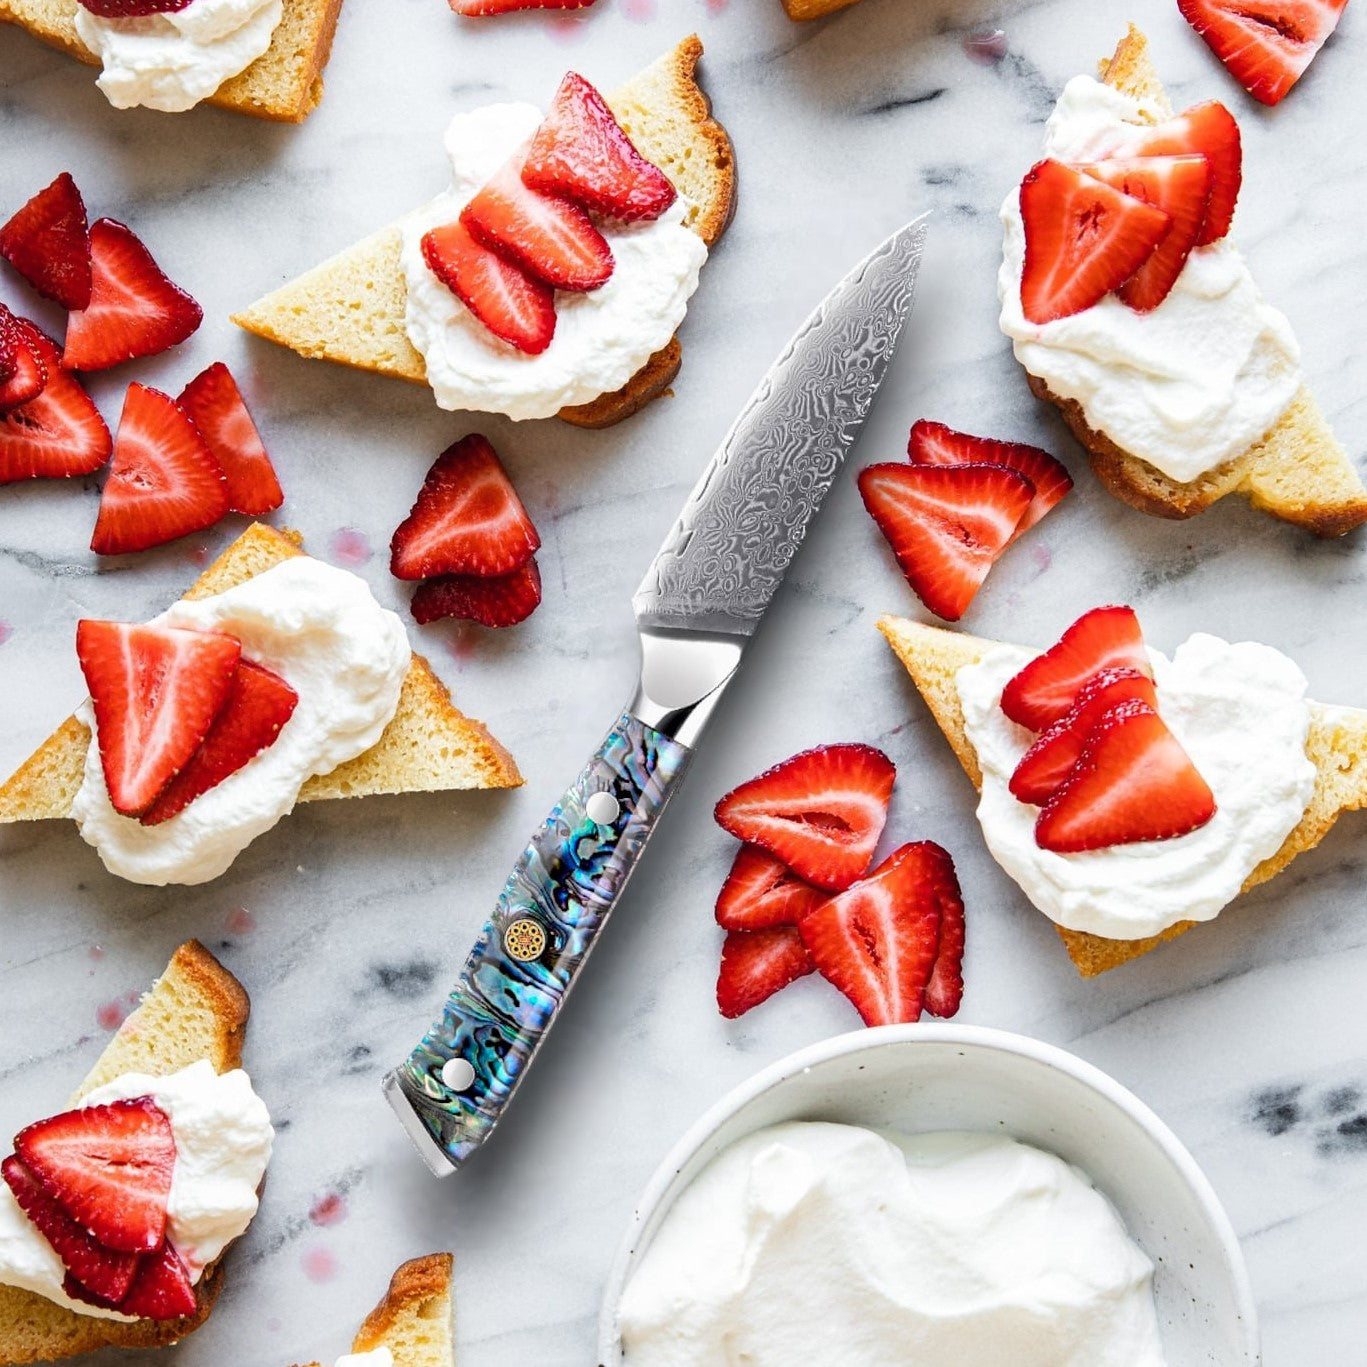 Paring Fruit Knife Cutting Strawberries with bread aesthetic - Hatori Hanzo Kitchen Premium Chef Knives